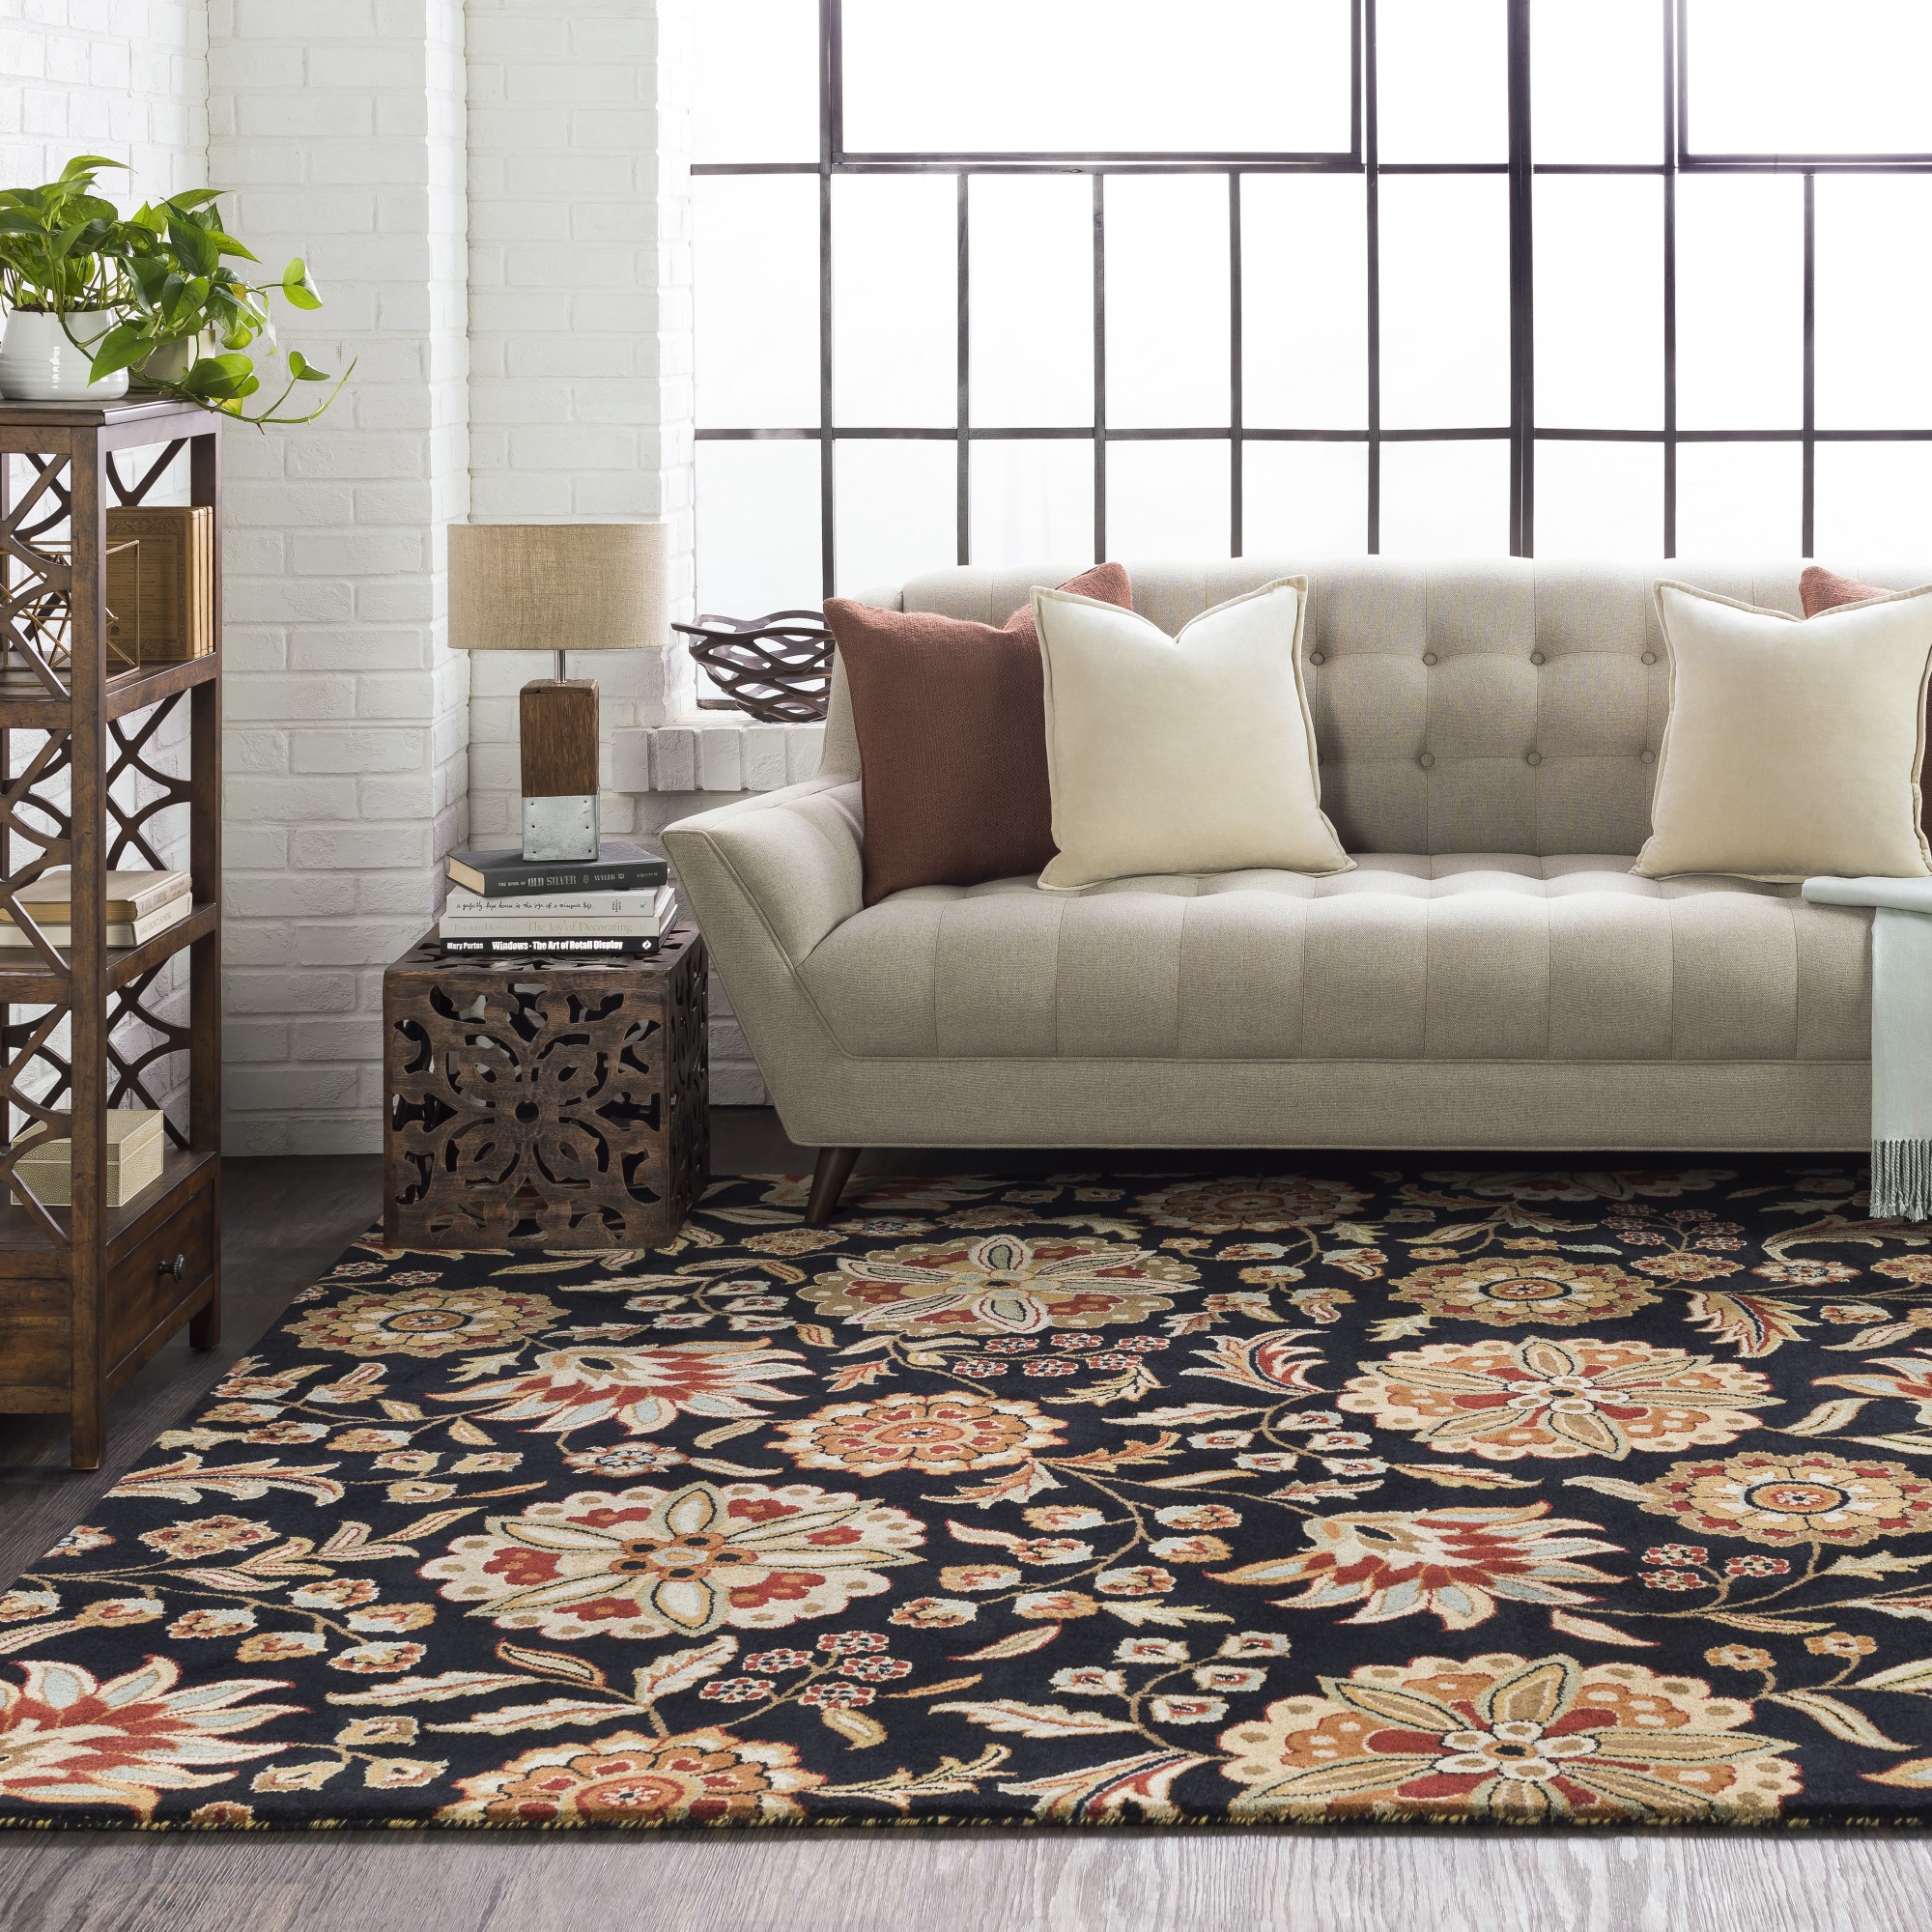 Unique Loom Sialk Hill Collection Traditional Persian Inspired Floral Area Rug 3' 3 x 3' 3 Round, Ivory/ Tan 